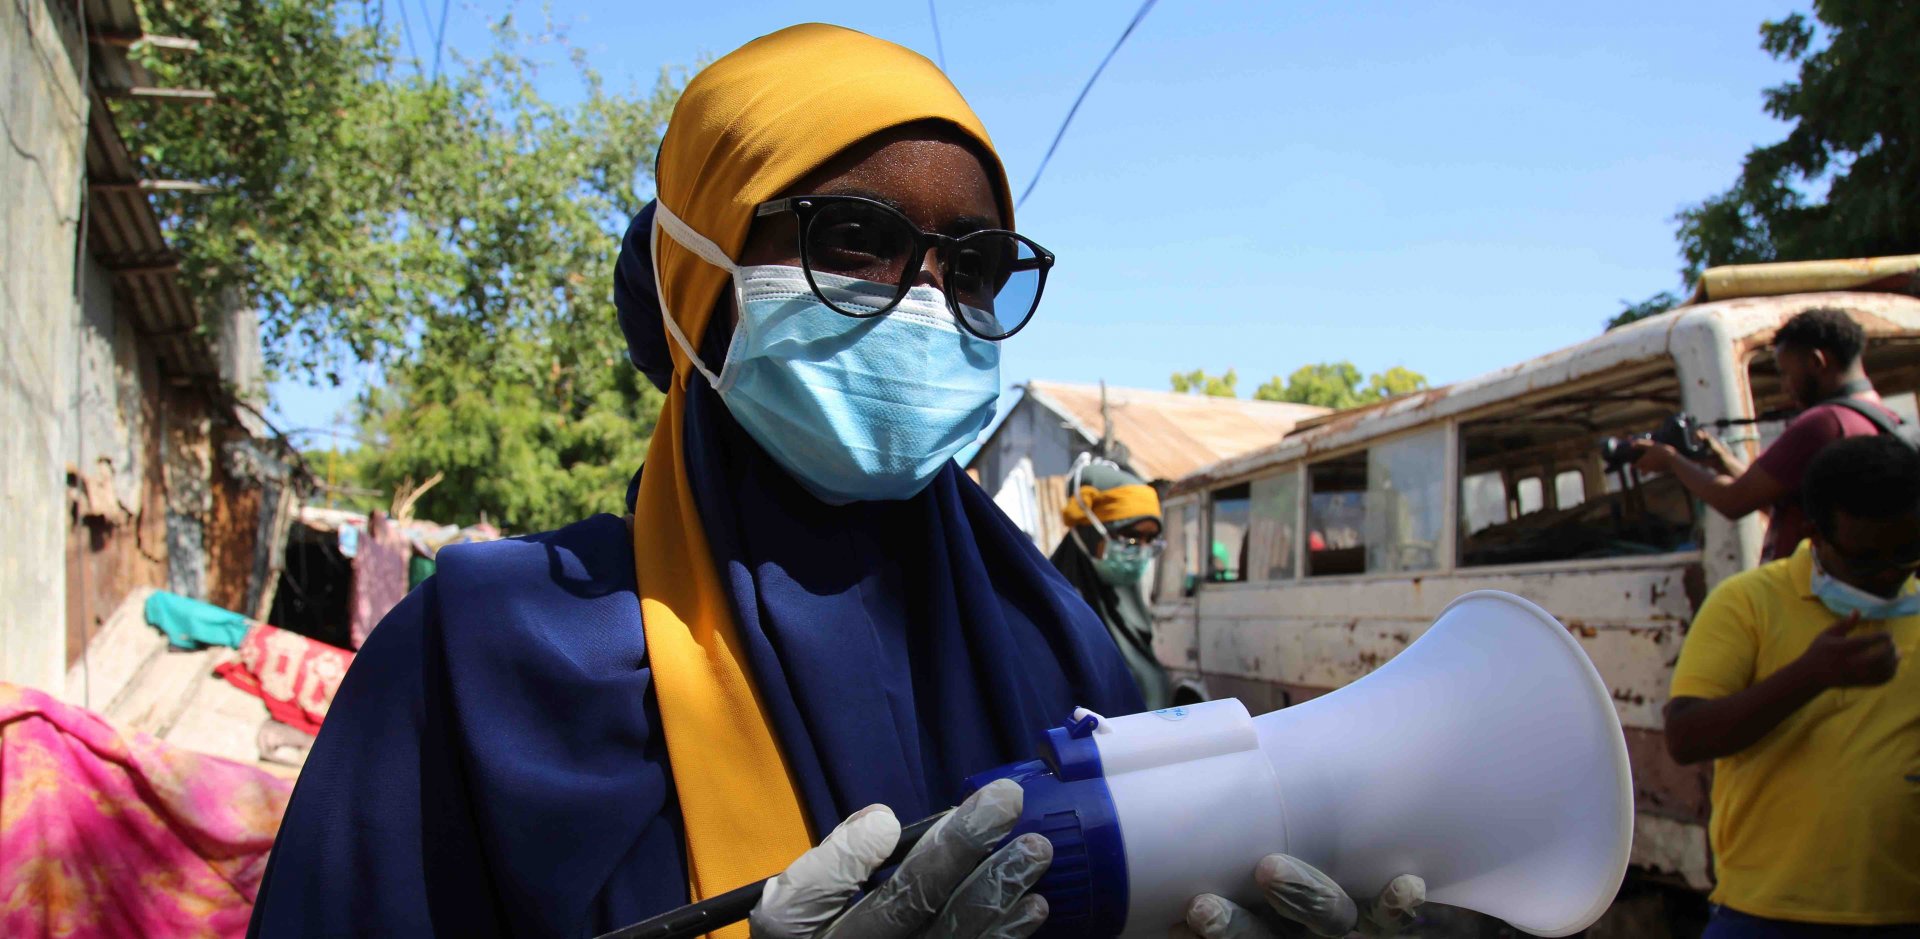 A Somali woman wearing a yellow headscarf, black framed glasses and a medical face mask holds a bullhorn